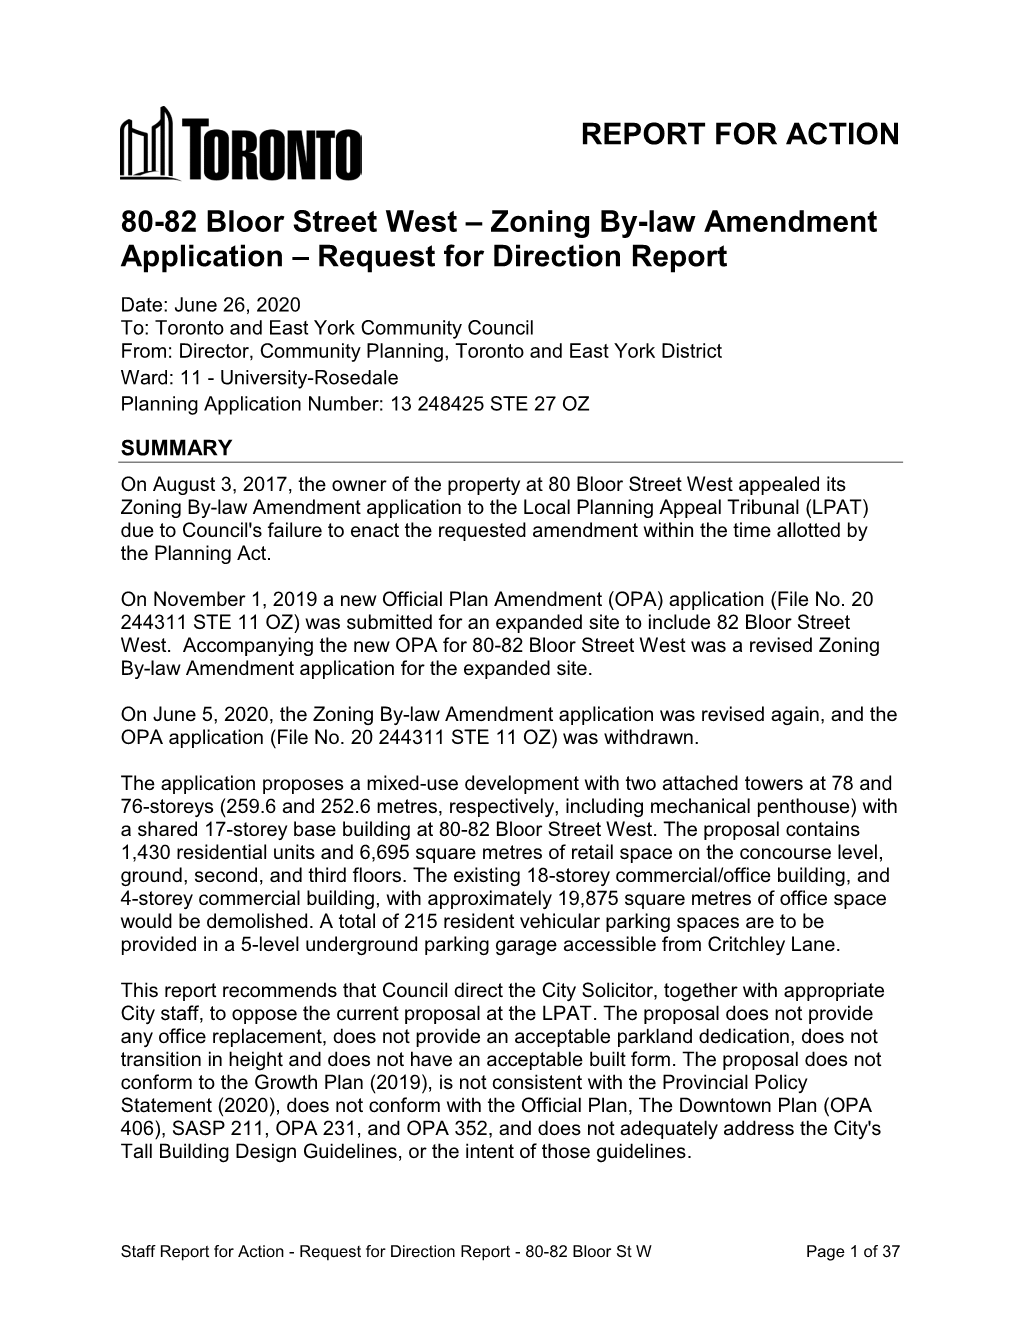 80-82 Bloor Street West – Zoning By-Law Amendment Application – Request for Direction Report